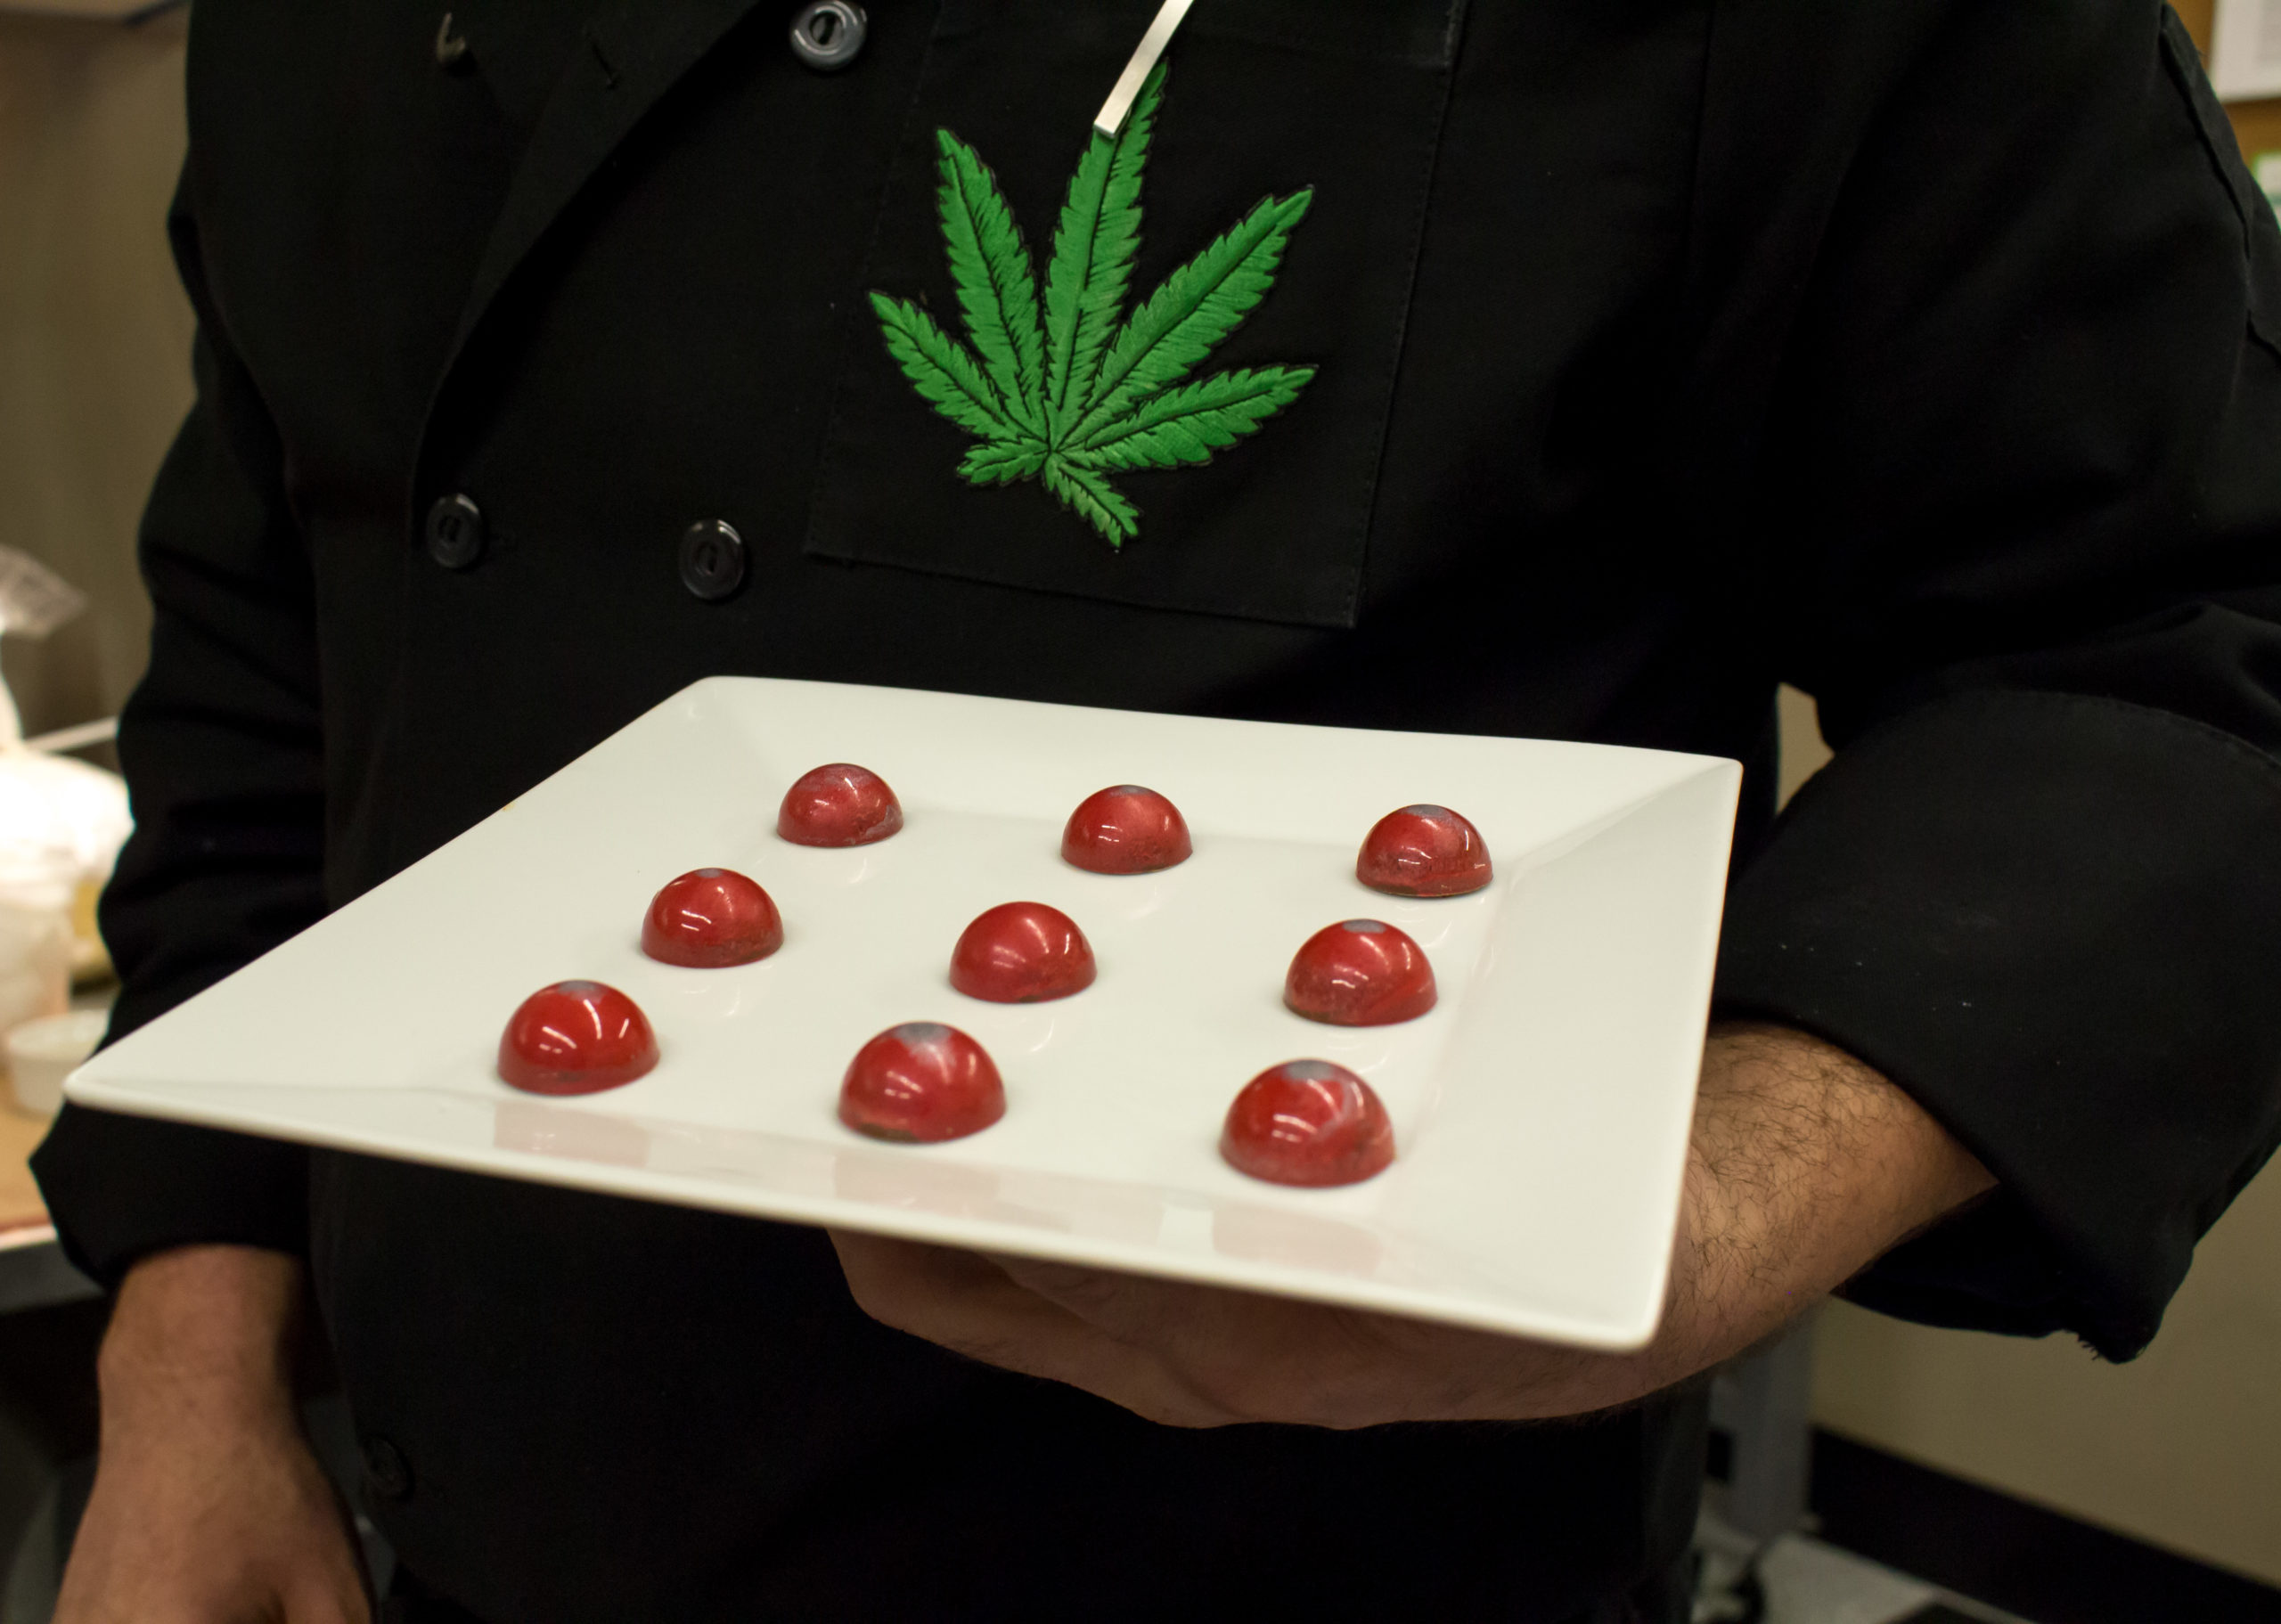 Fireline Cannabis branches out into the edible market thanks to Chef Jeremy Cooper.